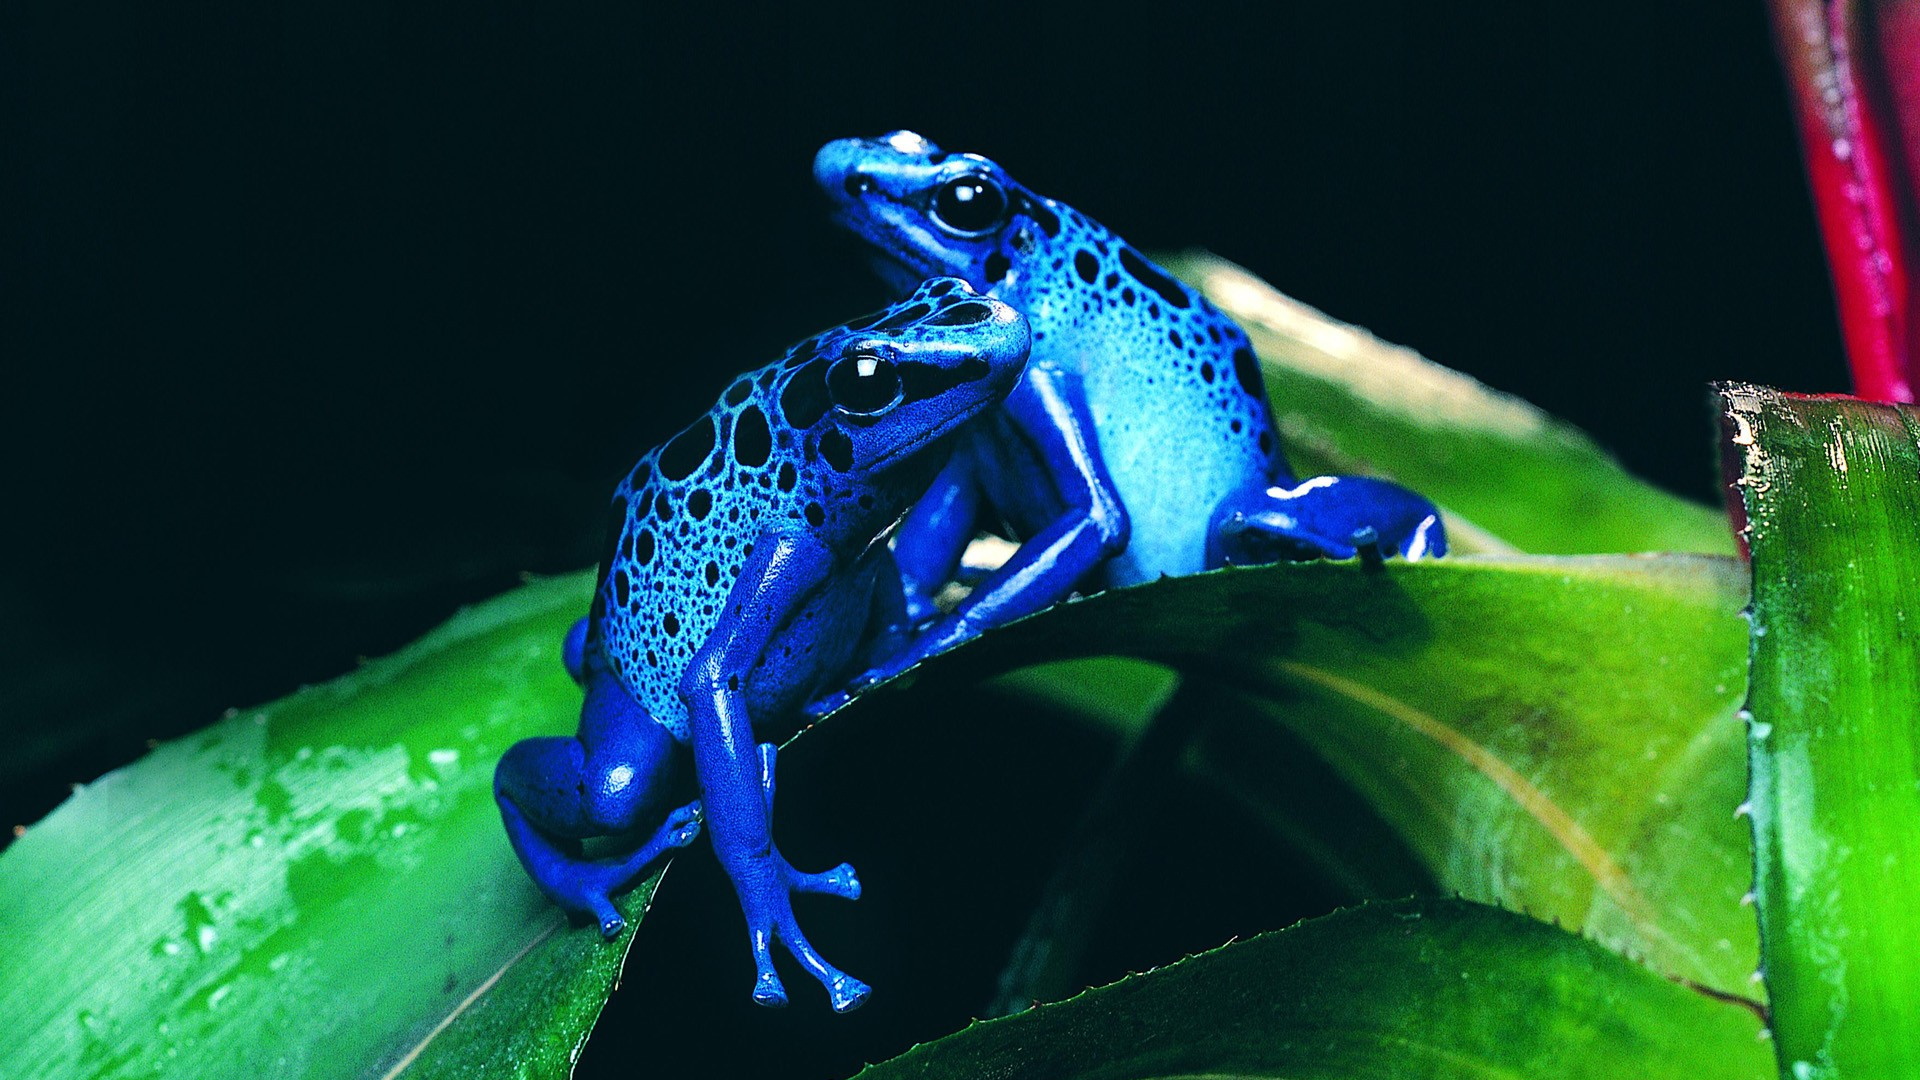  Wallpapers Full HD Wallpapers 1080p 5802 animals hd wallpapers frogs 1920x1080